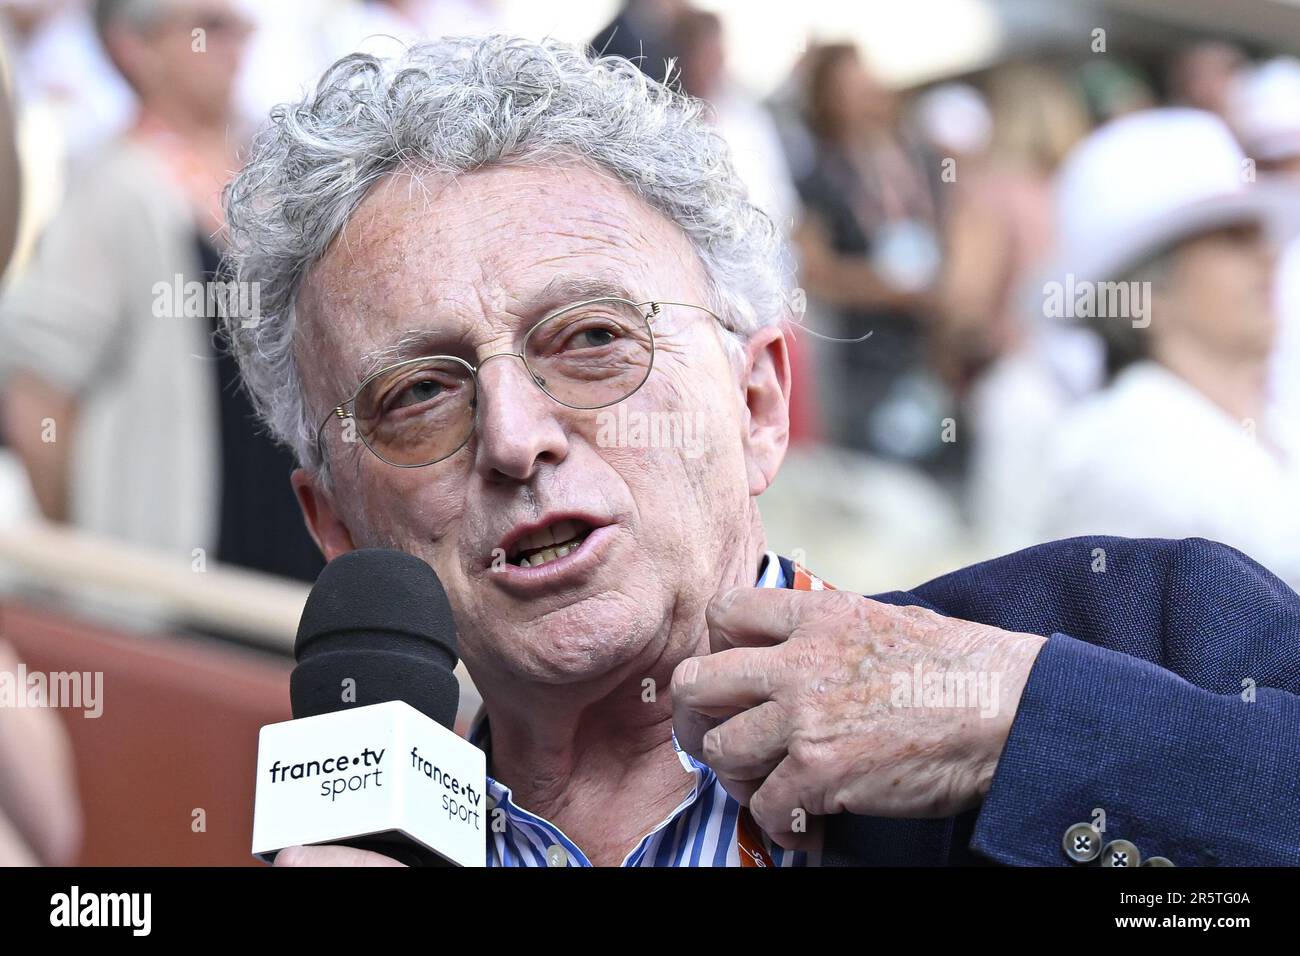 Nelson Monfort, journalist for French TV channel France Televisions (FranceTV Sport), during the French Open, Grand Slam tennis tournament on June 4, 2023 at Roland Garros stadium in Paris, France